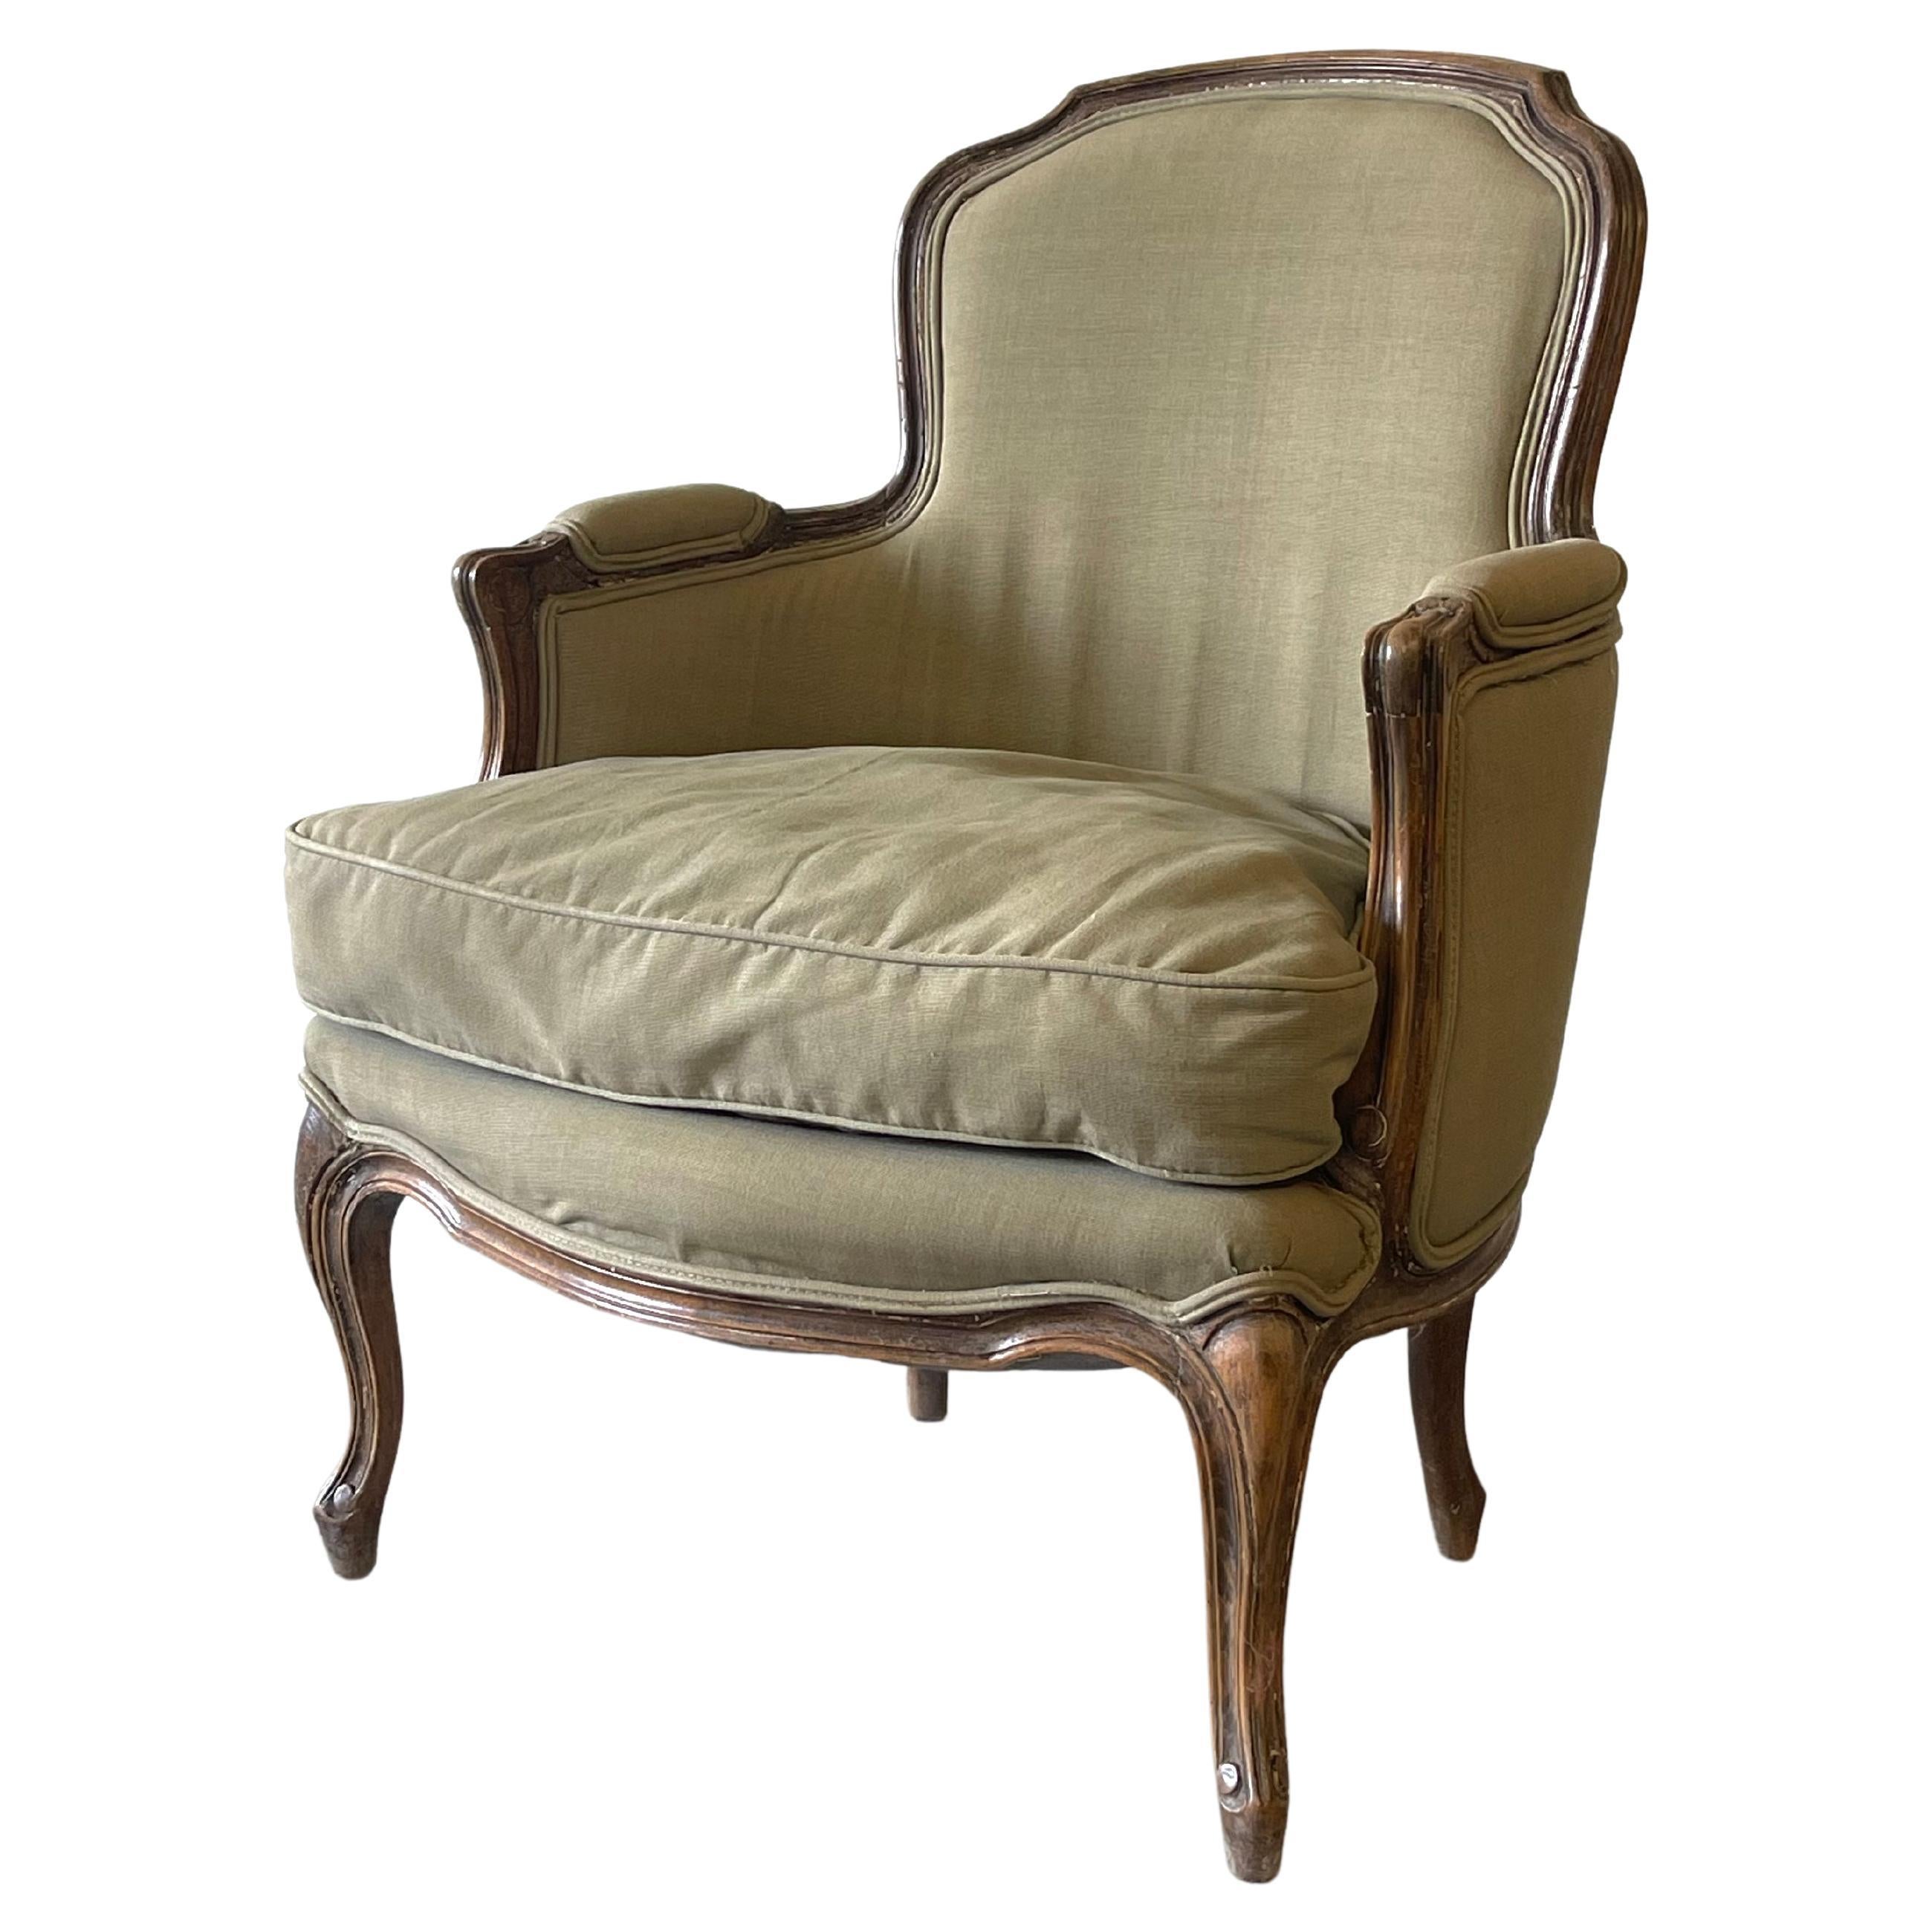 French Provincial Style Bergere Arm Chairs For Sale